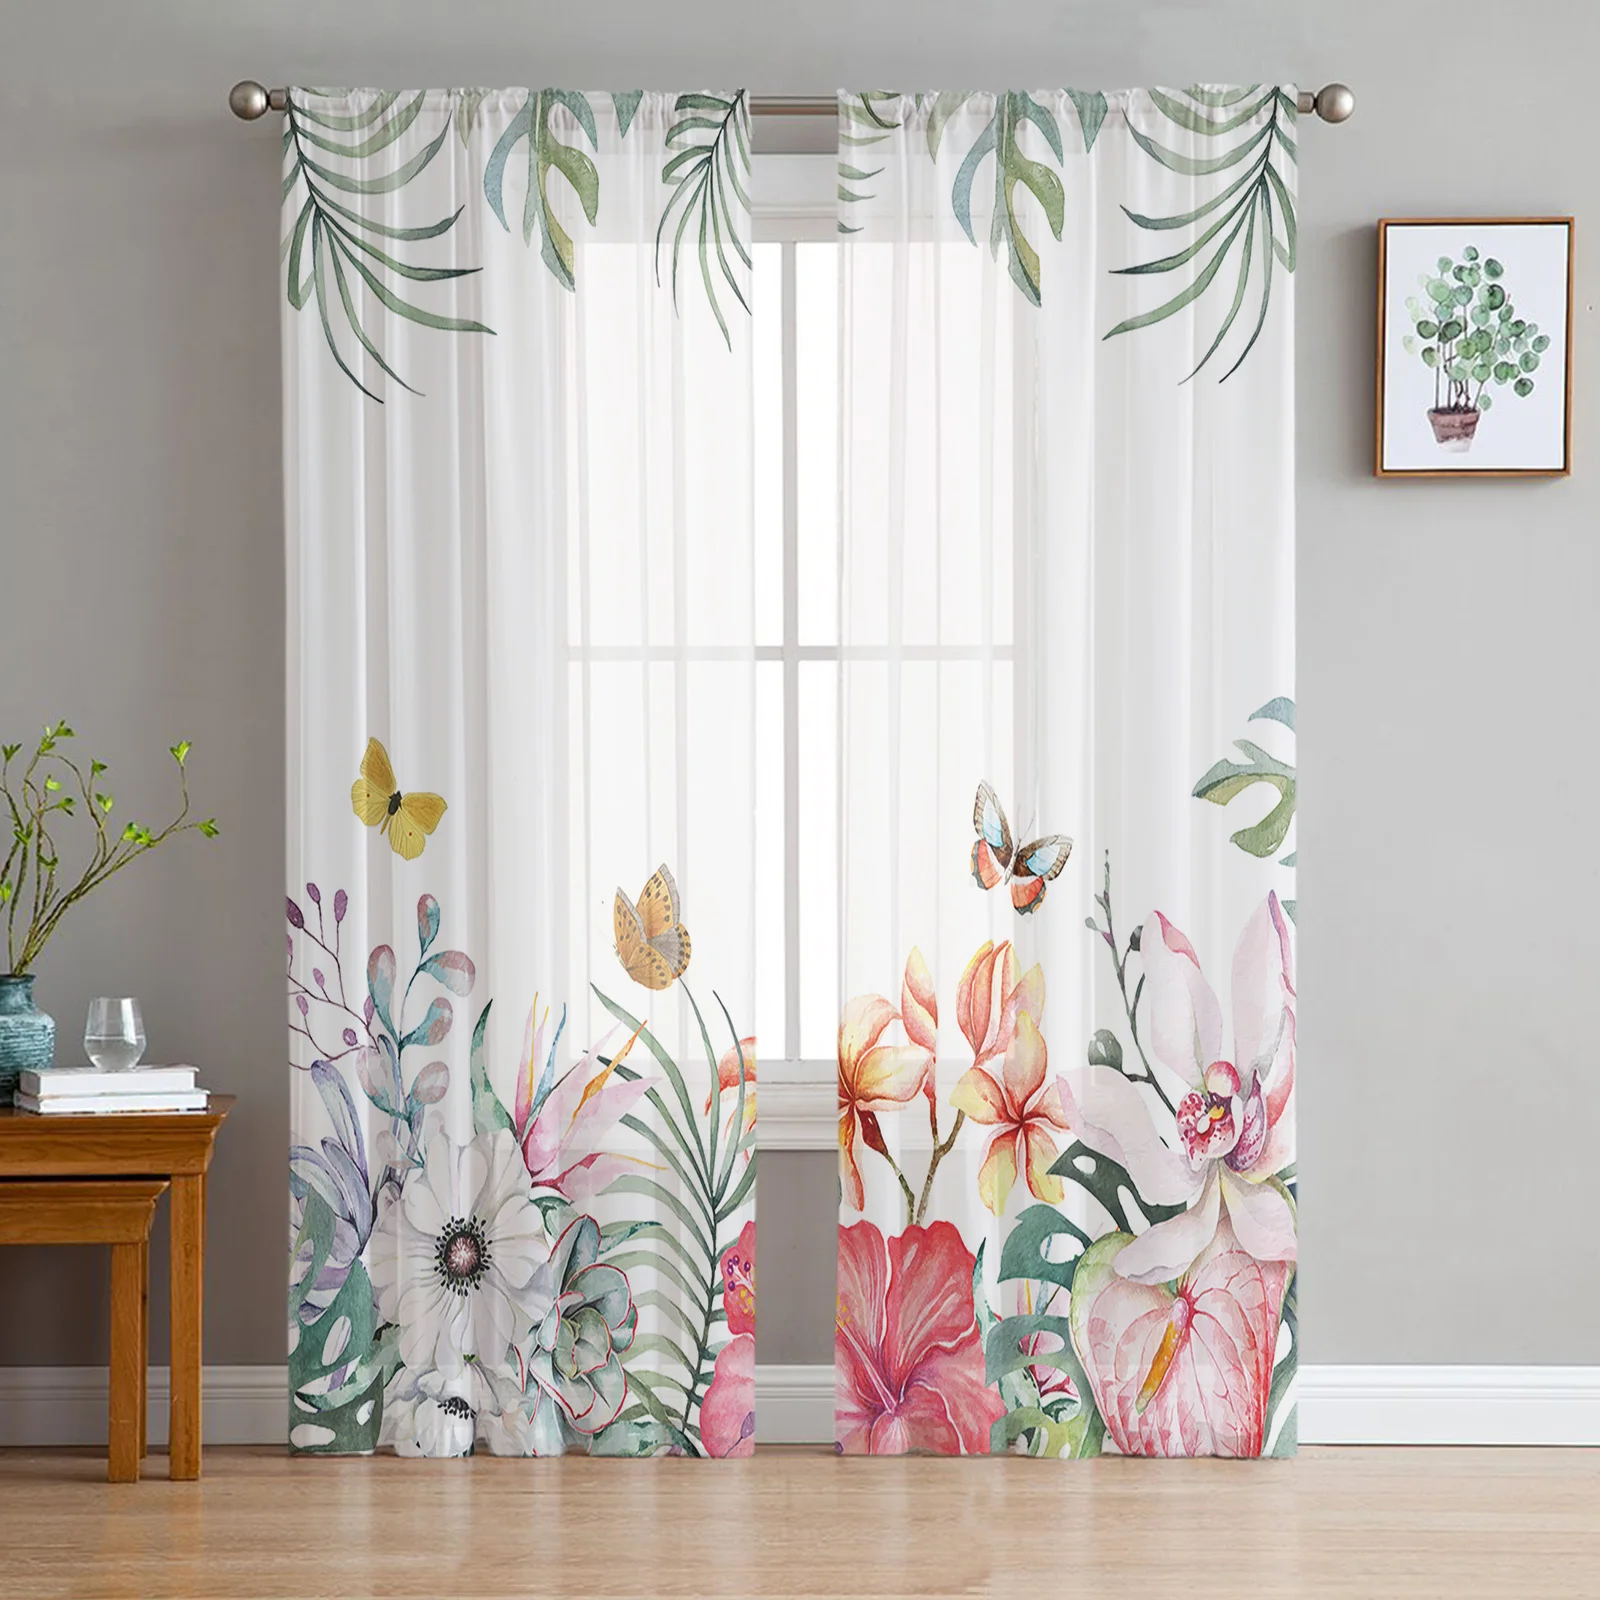 

Ins Tropical Plant Palm Banana Leaf Flower Tulle Curtains Living Room Bedroom Sheer Decor Chiffon Voile Kitchen Window Drapes